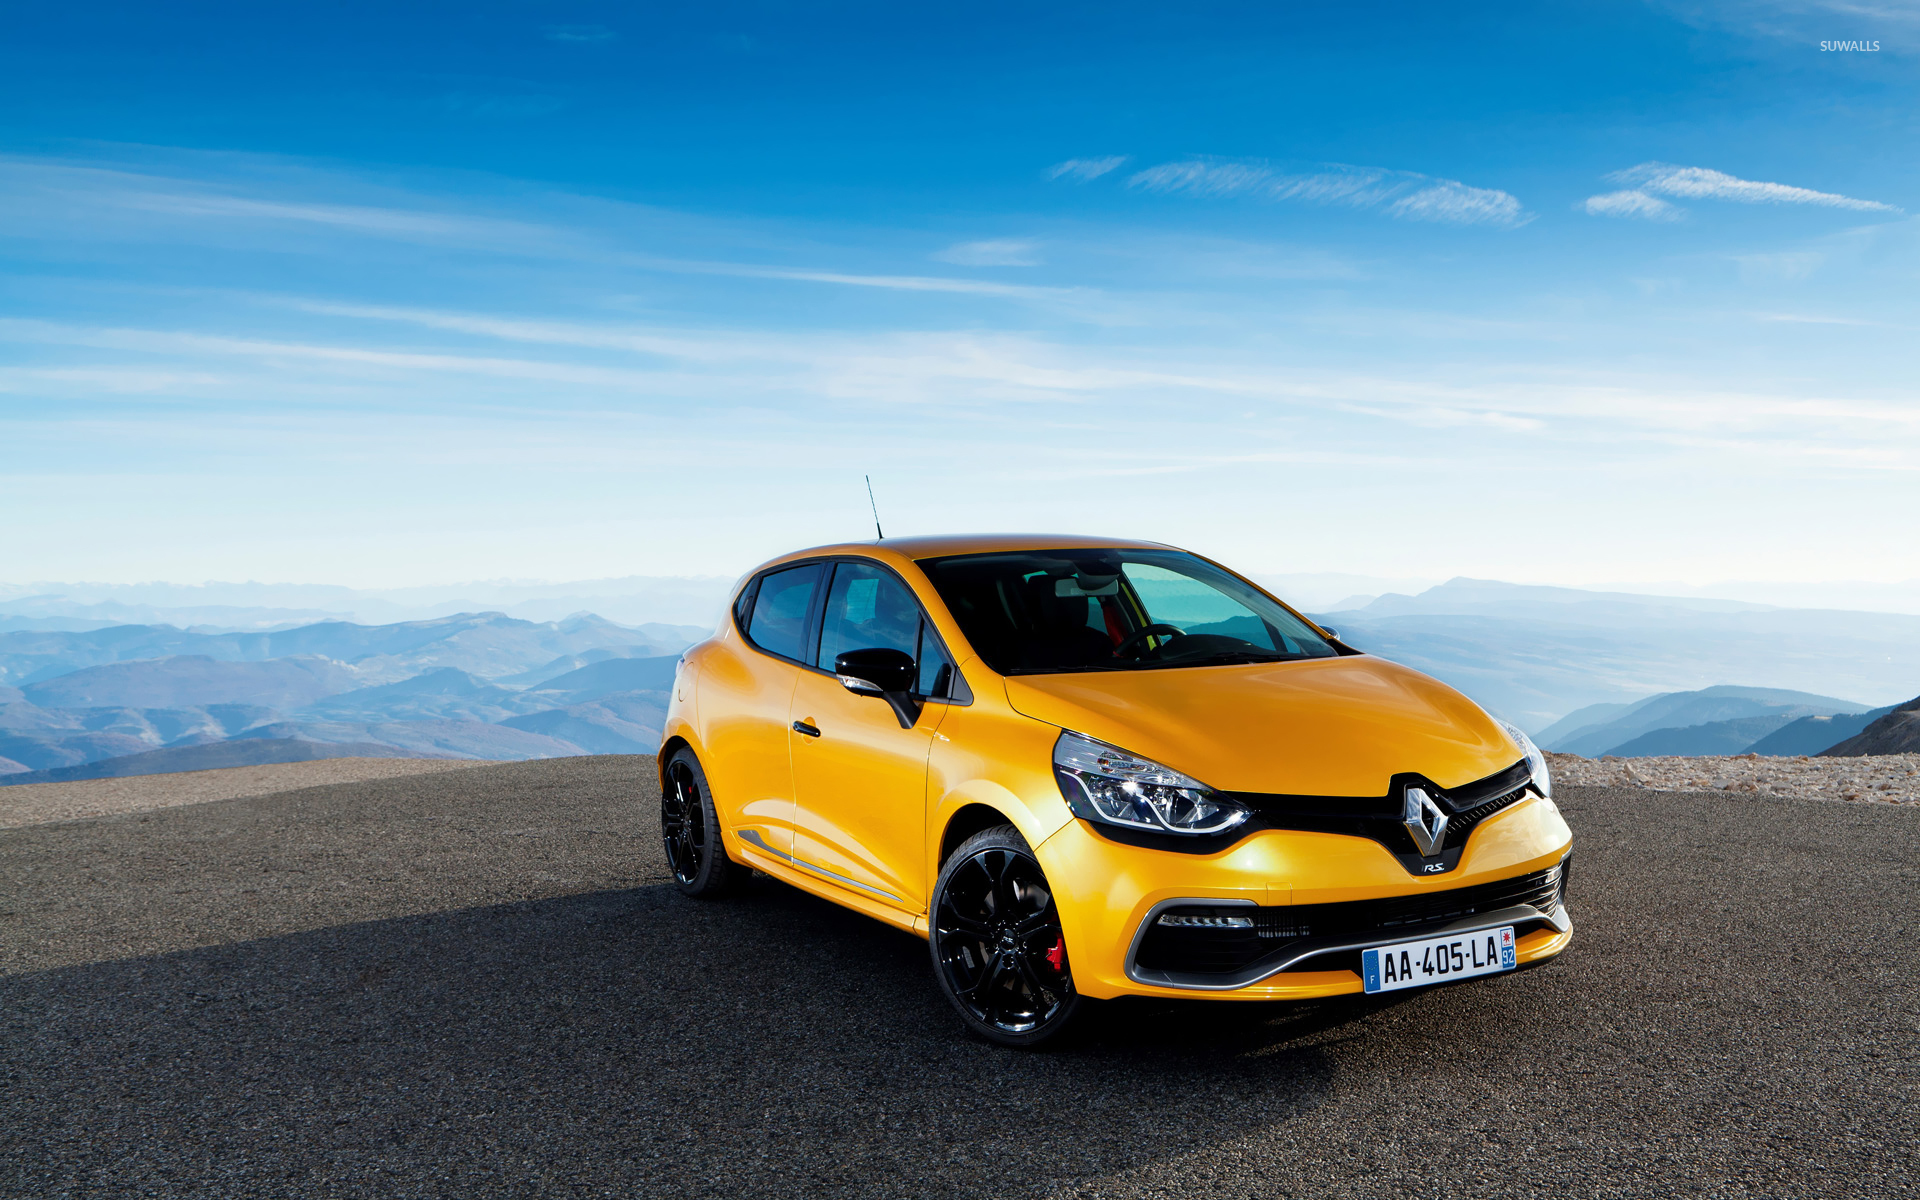 2013 Yellow Renault Clio RS 200 wallpaper - Car wallpapers - #50885